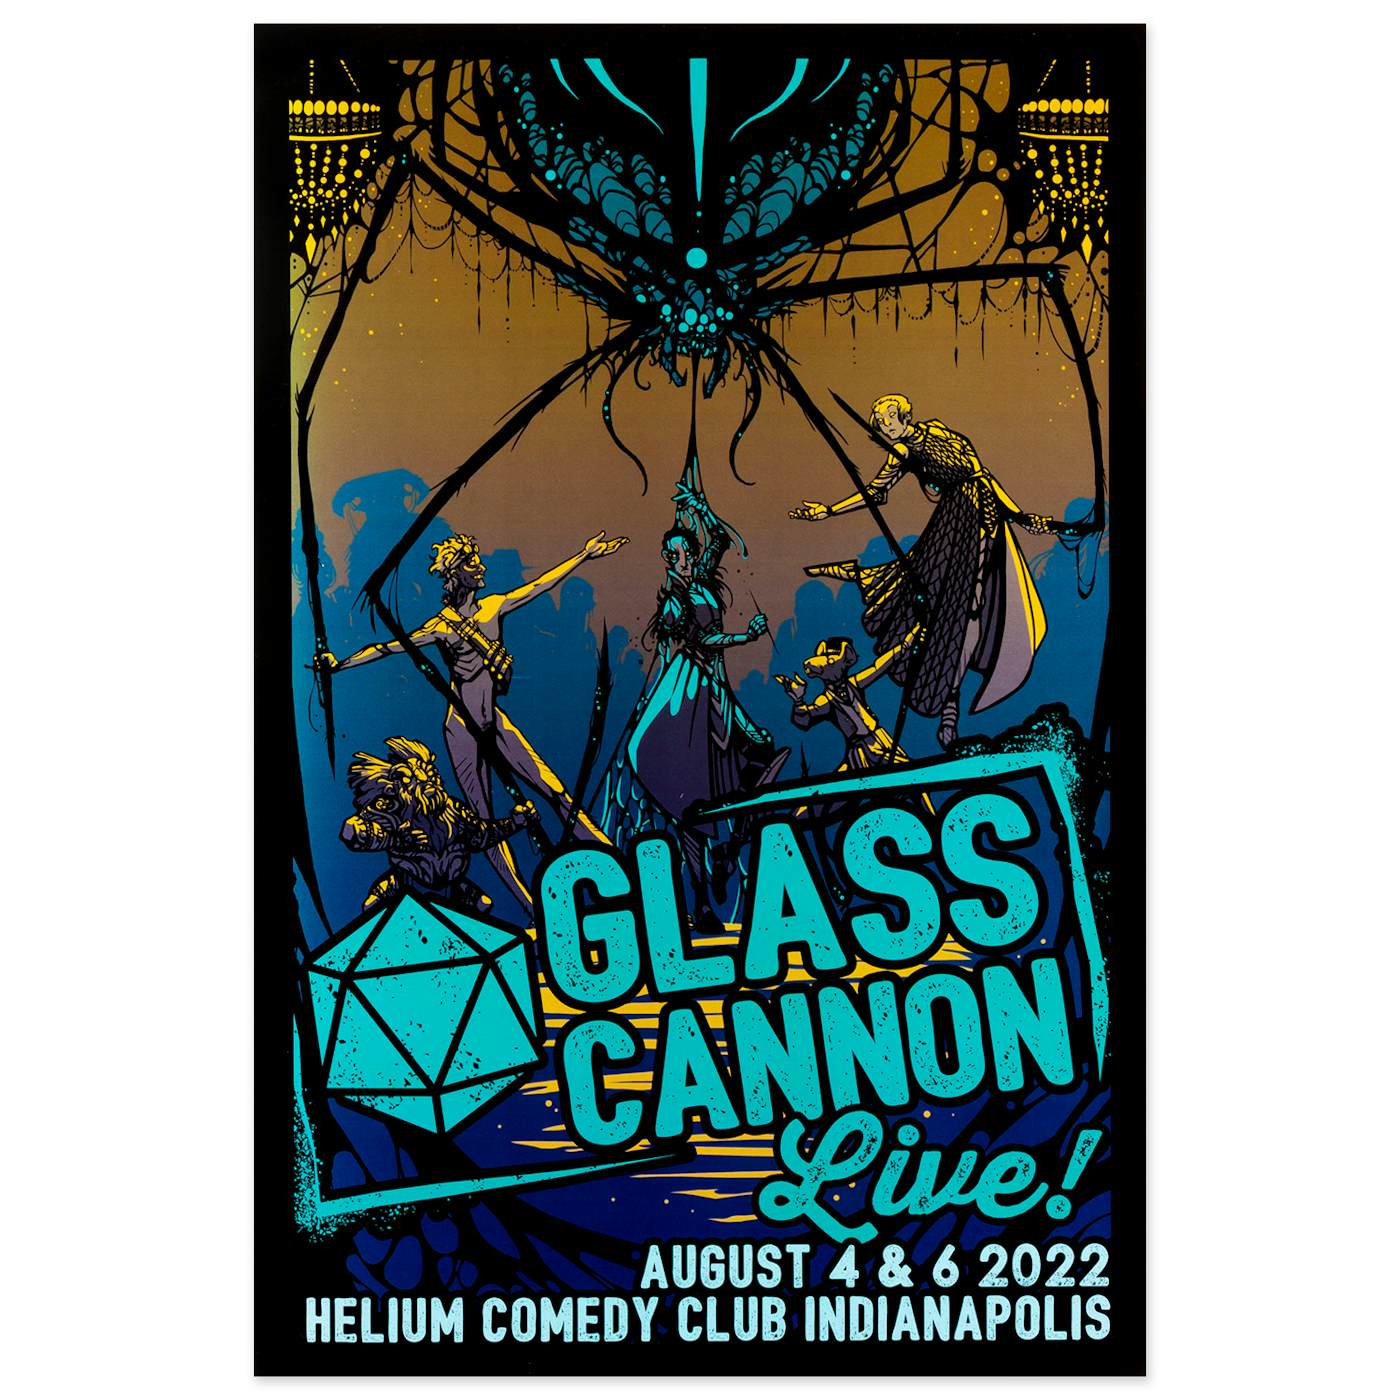 Glass Cannon Network Helium Comedy Club Indianapolis, IN 8/4-6/2022 Poster